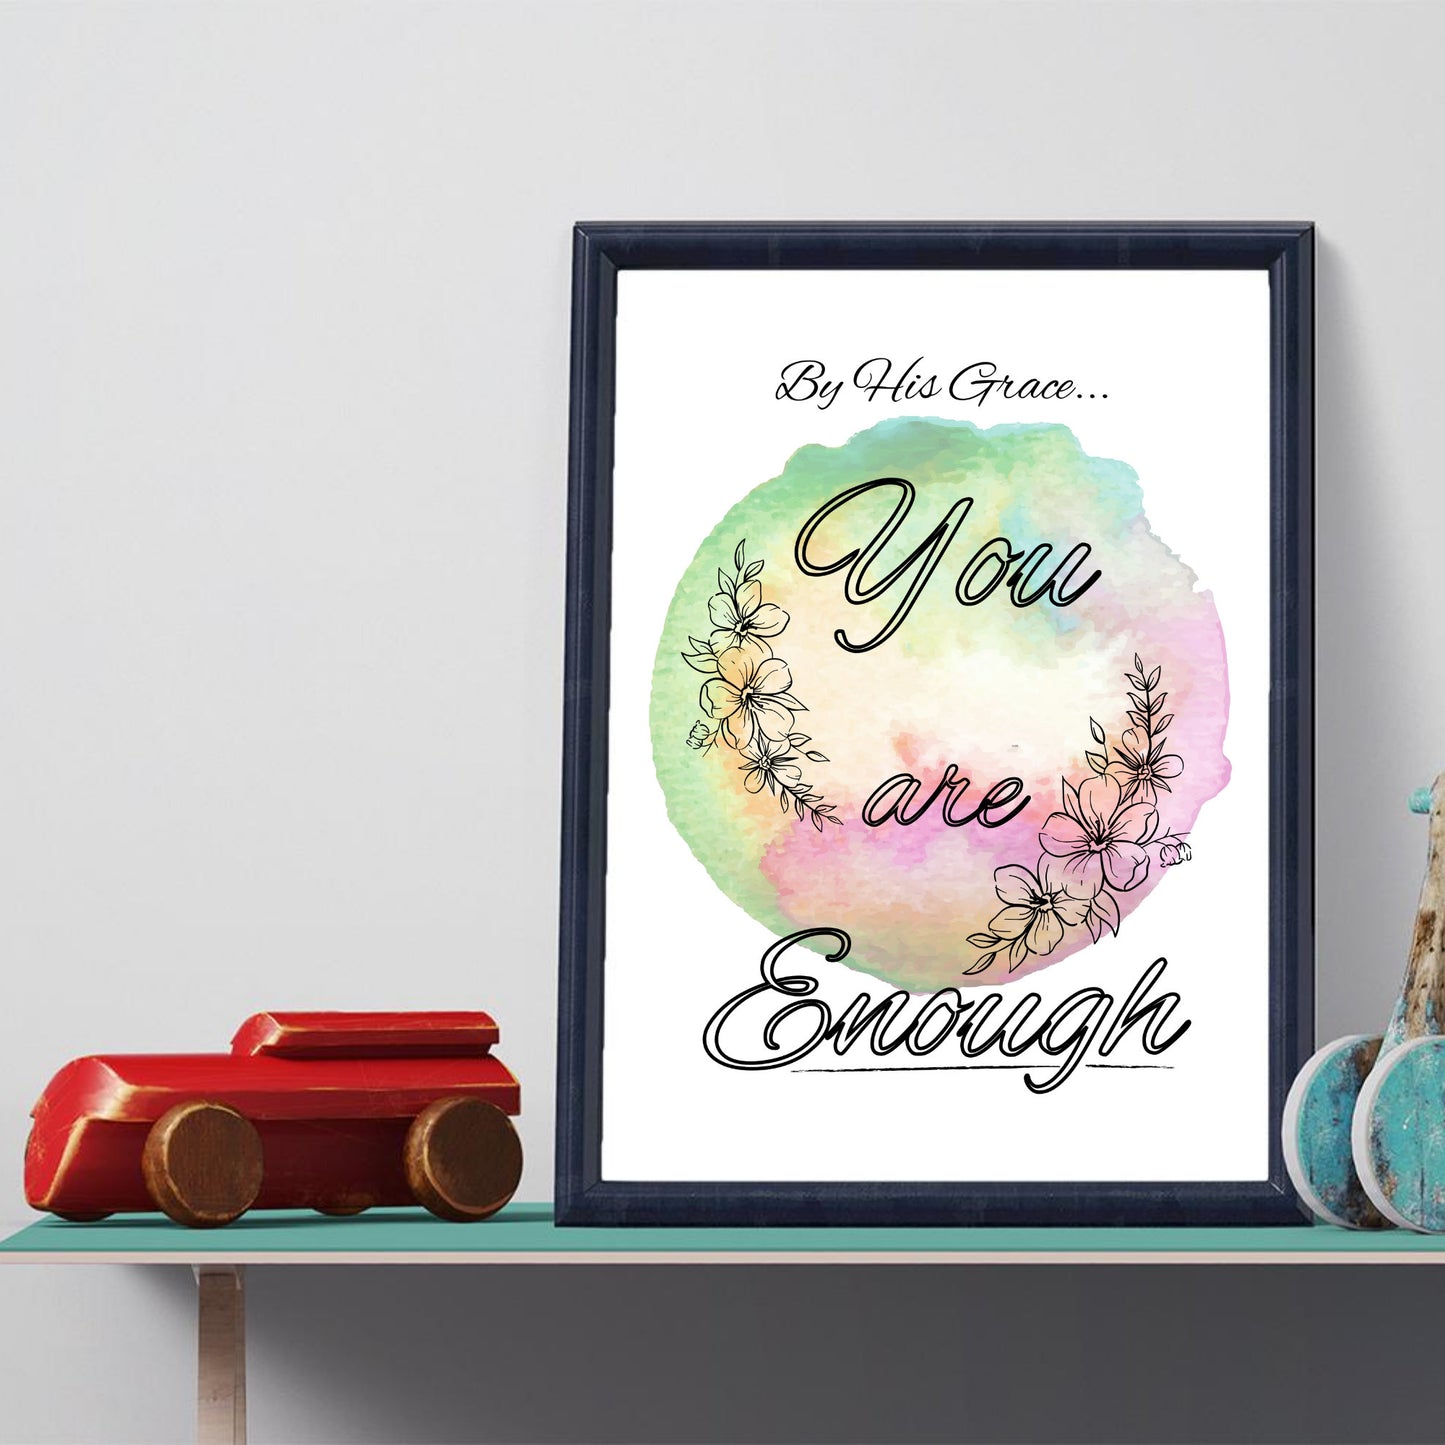 Instant-Download Watercolor Typography Print in Rainbow, Printable, Home/Office/Home Office/Bedroom/Living Room Wall Art Print